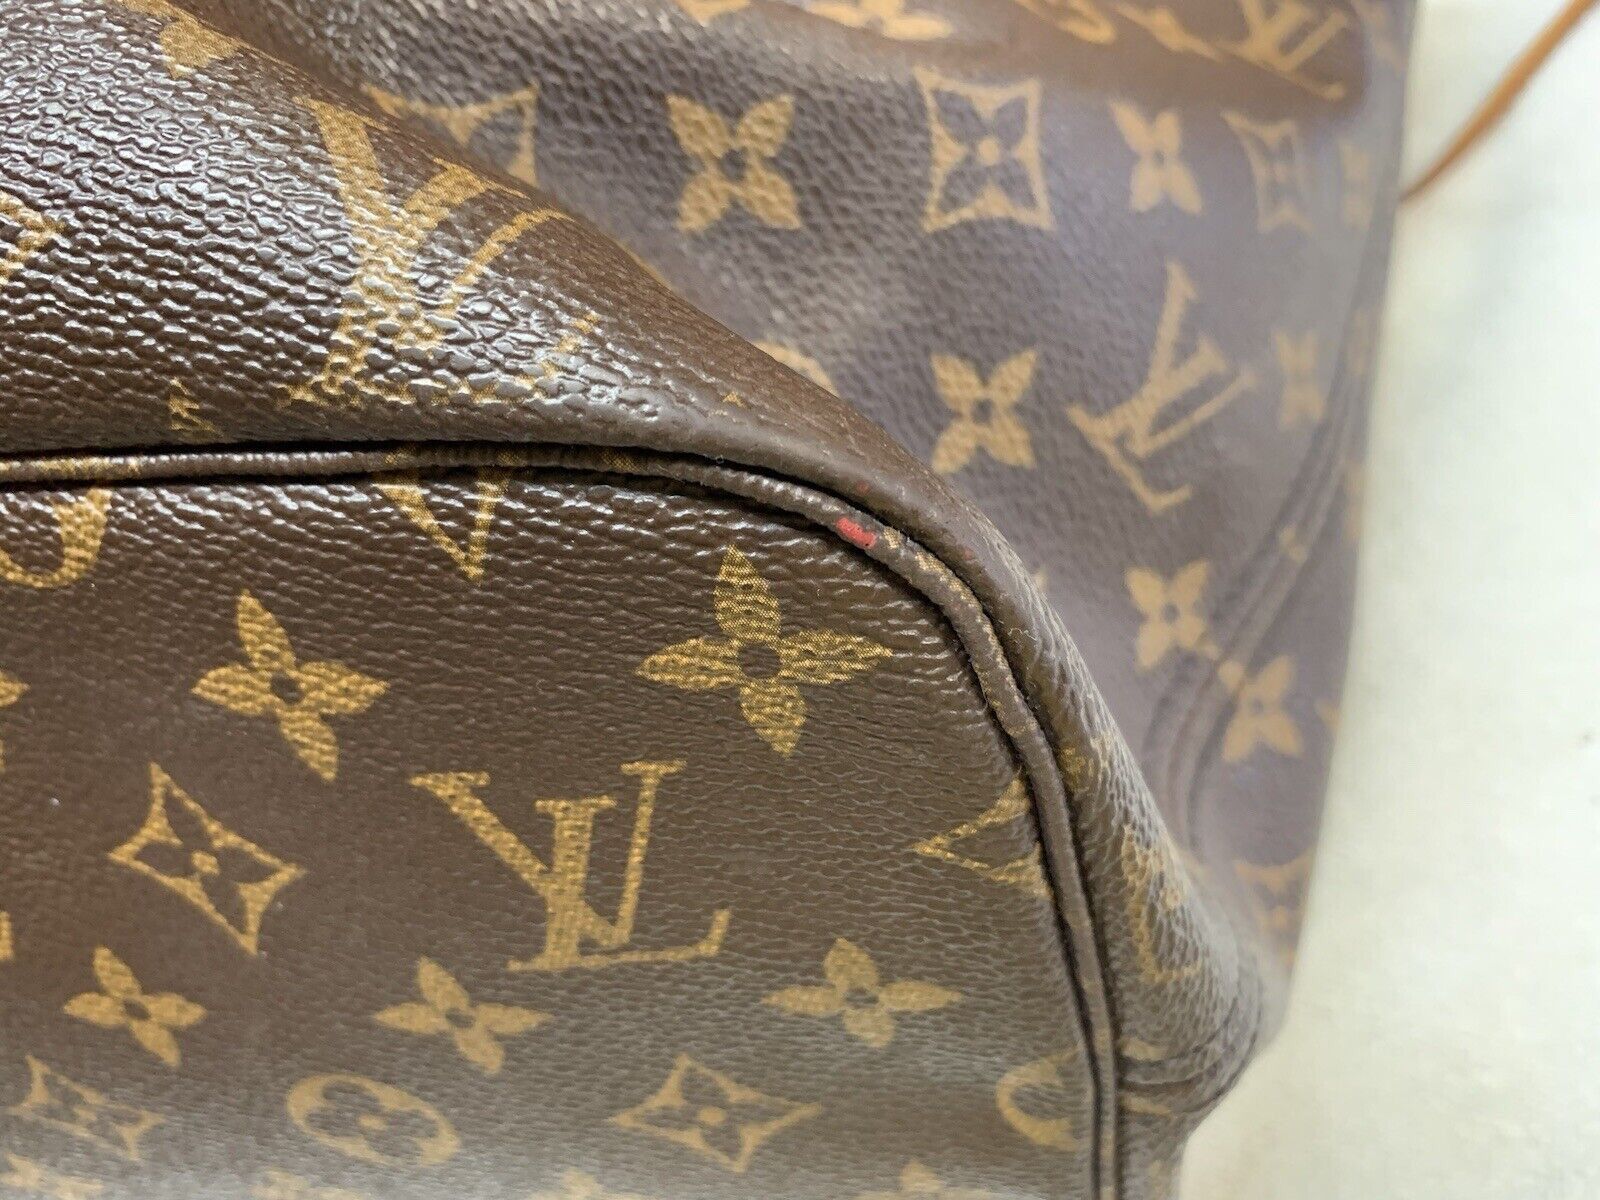 Louis Vuitton Neverfull GM Tote for Sale in Honolulu, HI - OfferUp